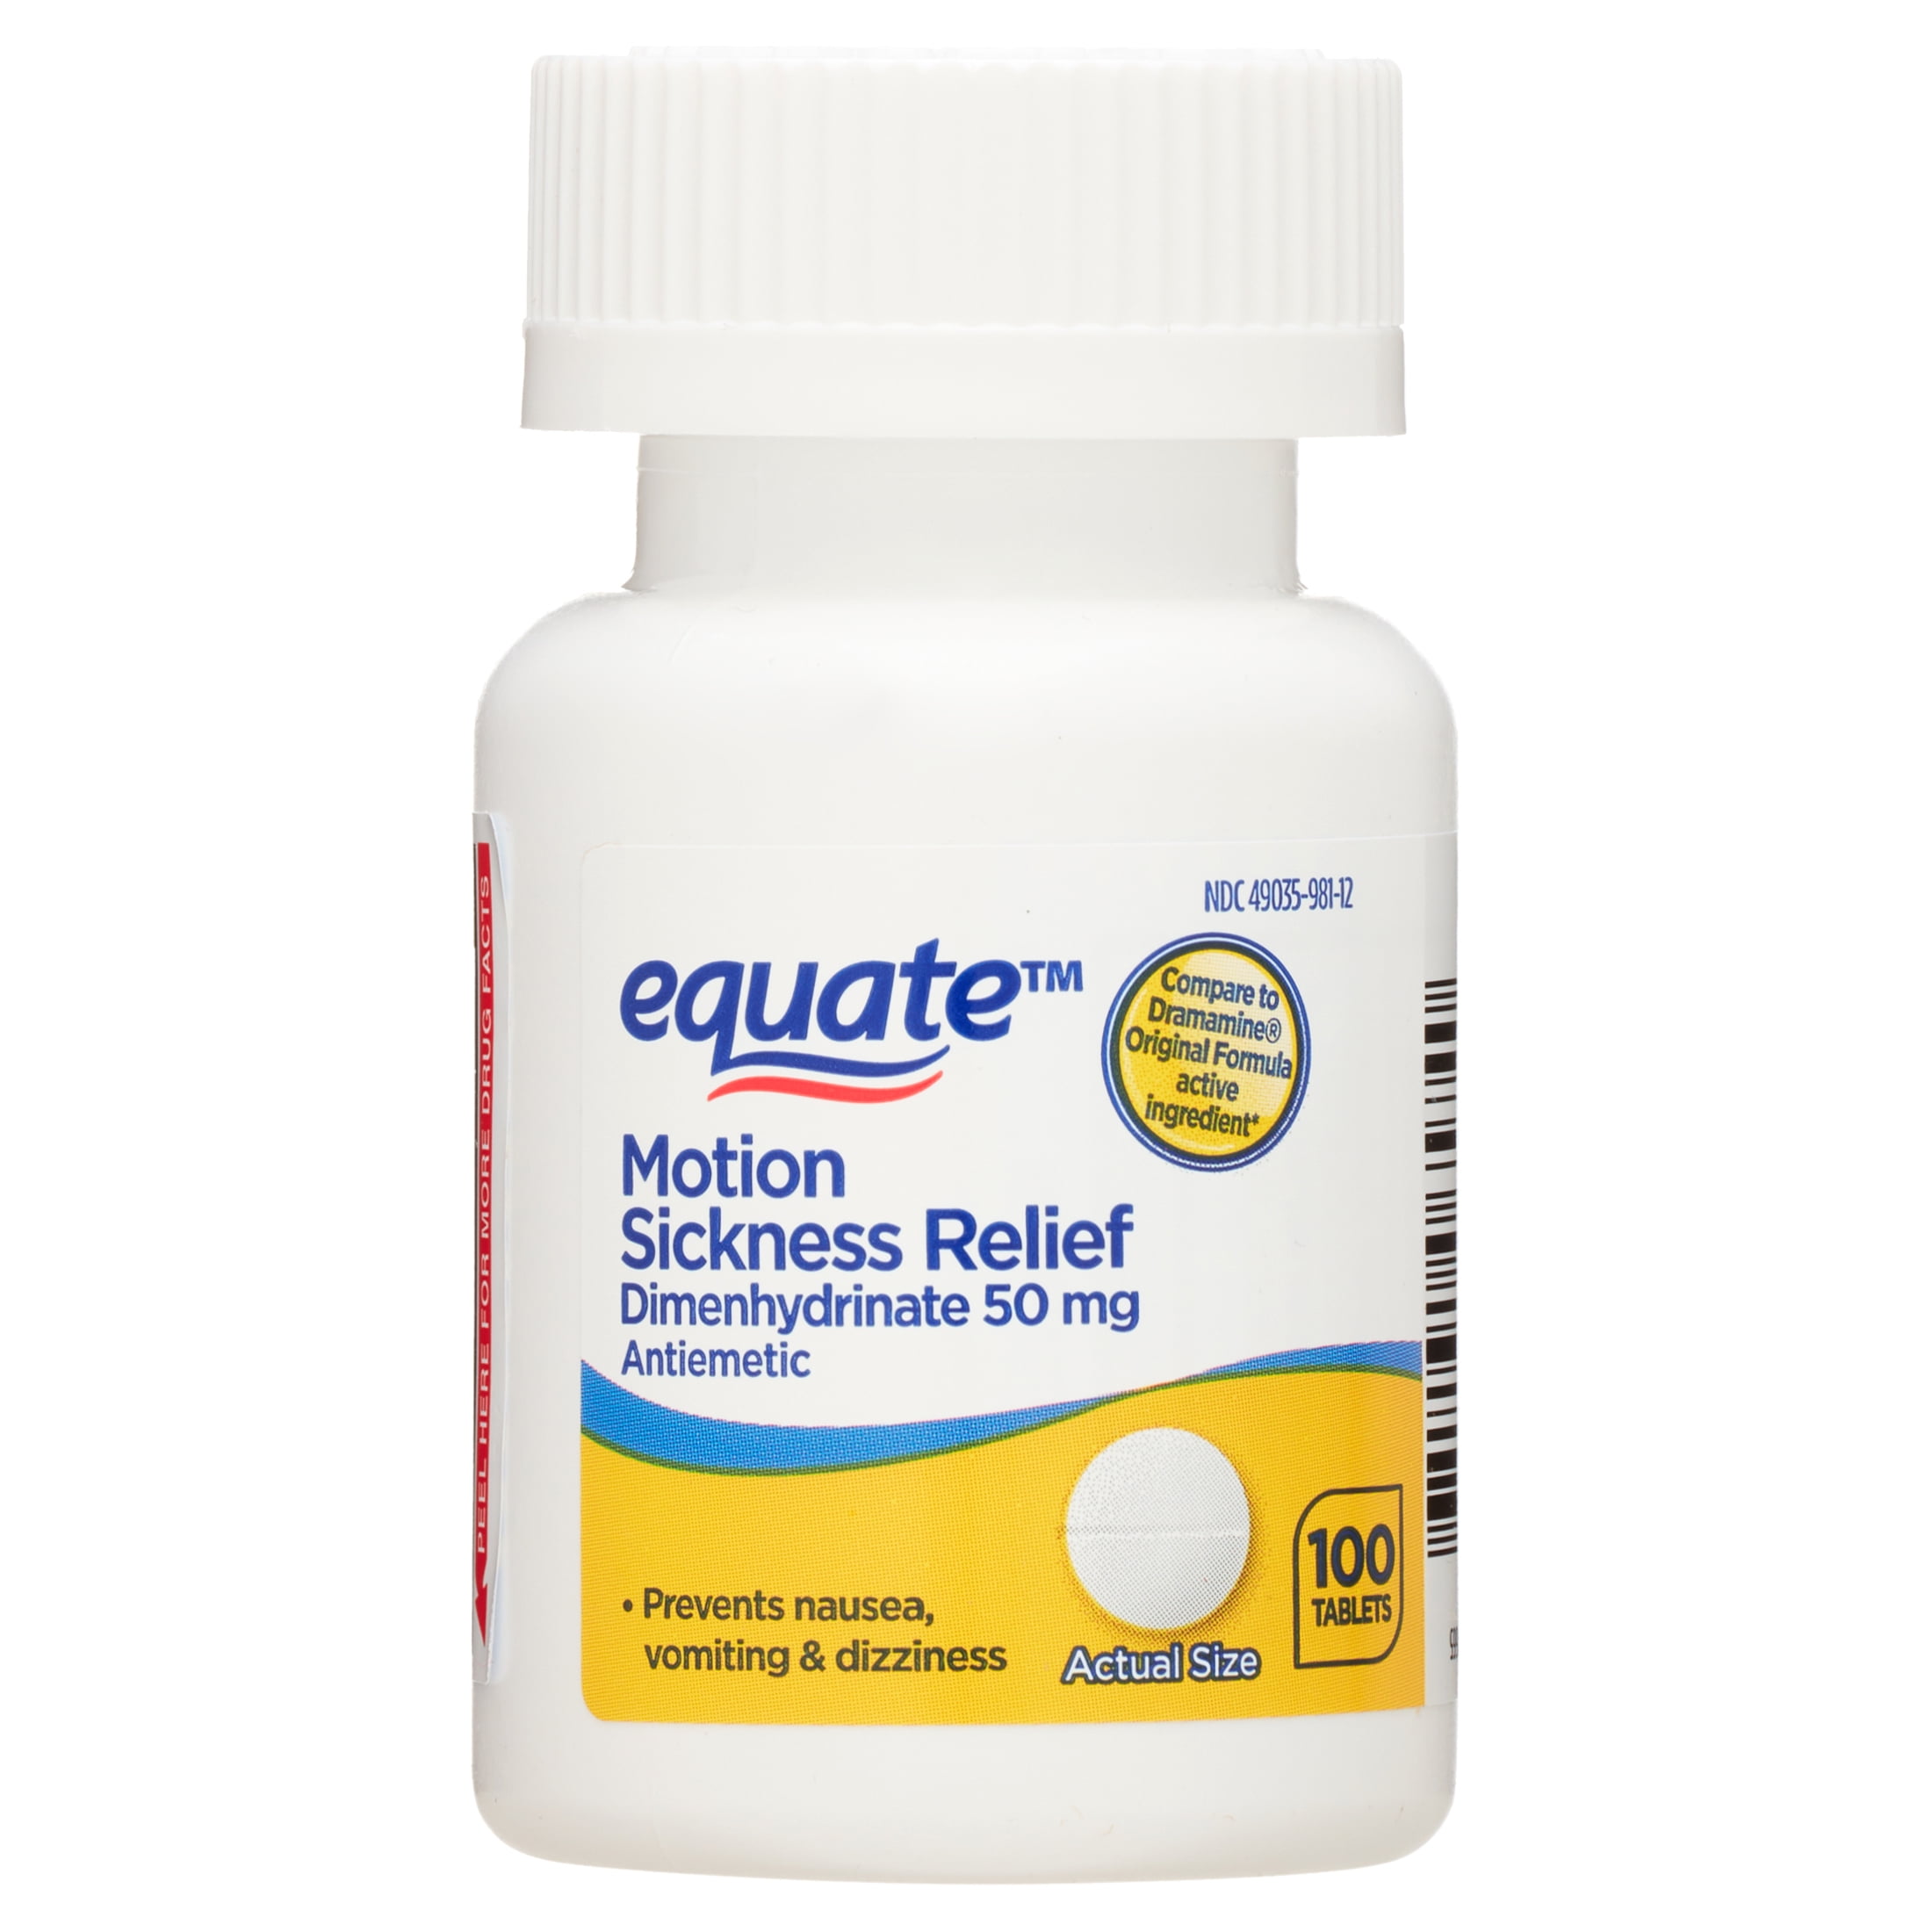 Equate Fast-Acting Motion Sickness Relief Dimenhydrinate Tablets